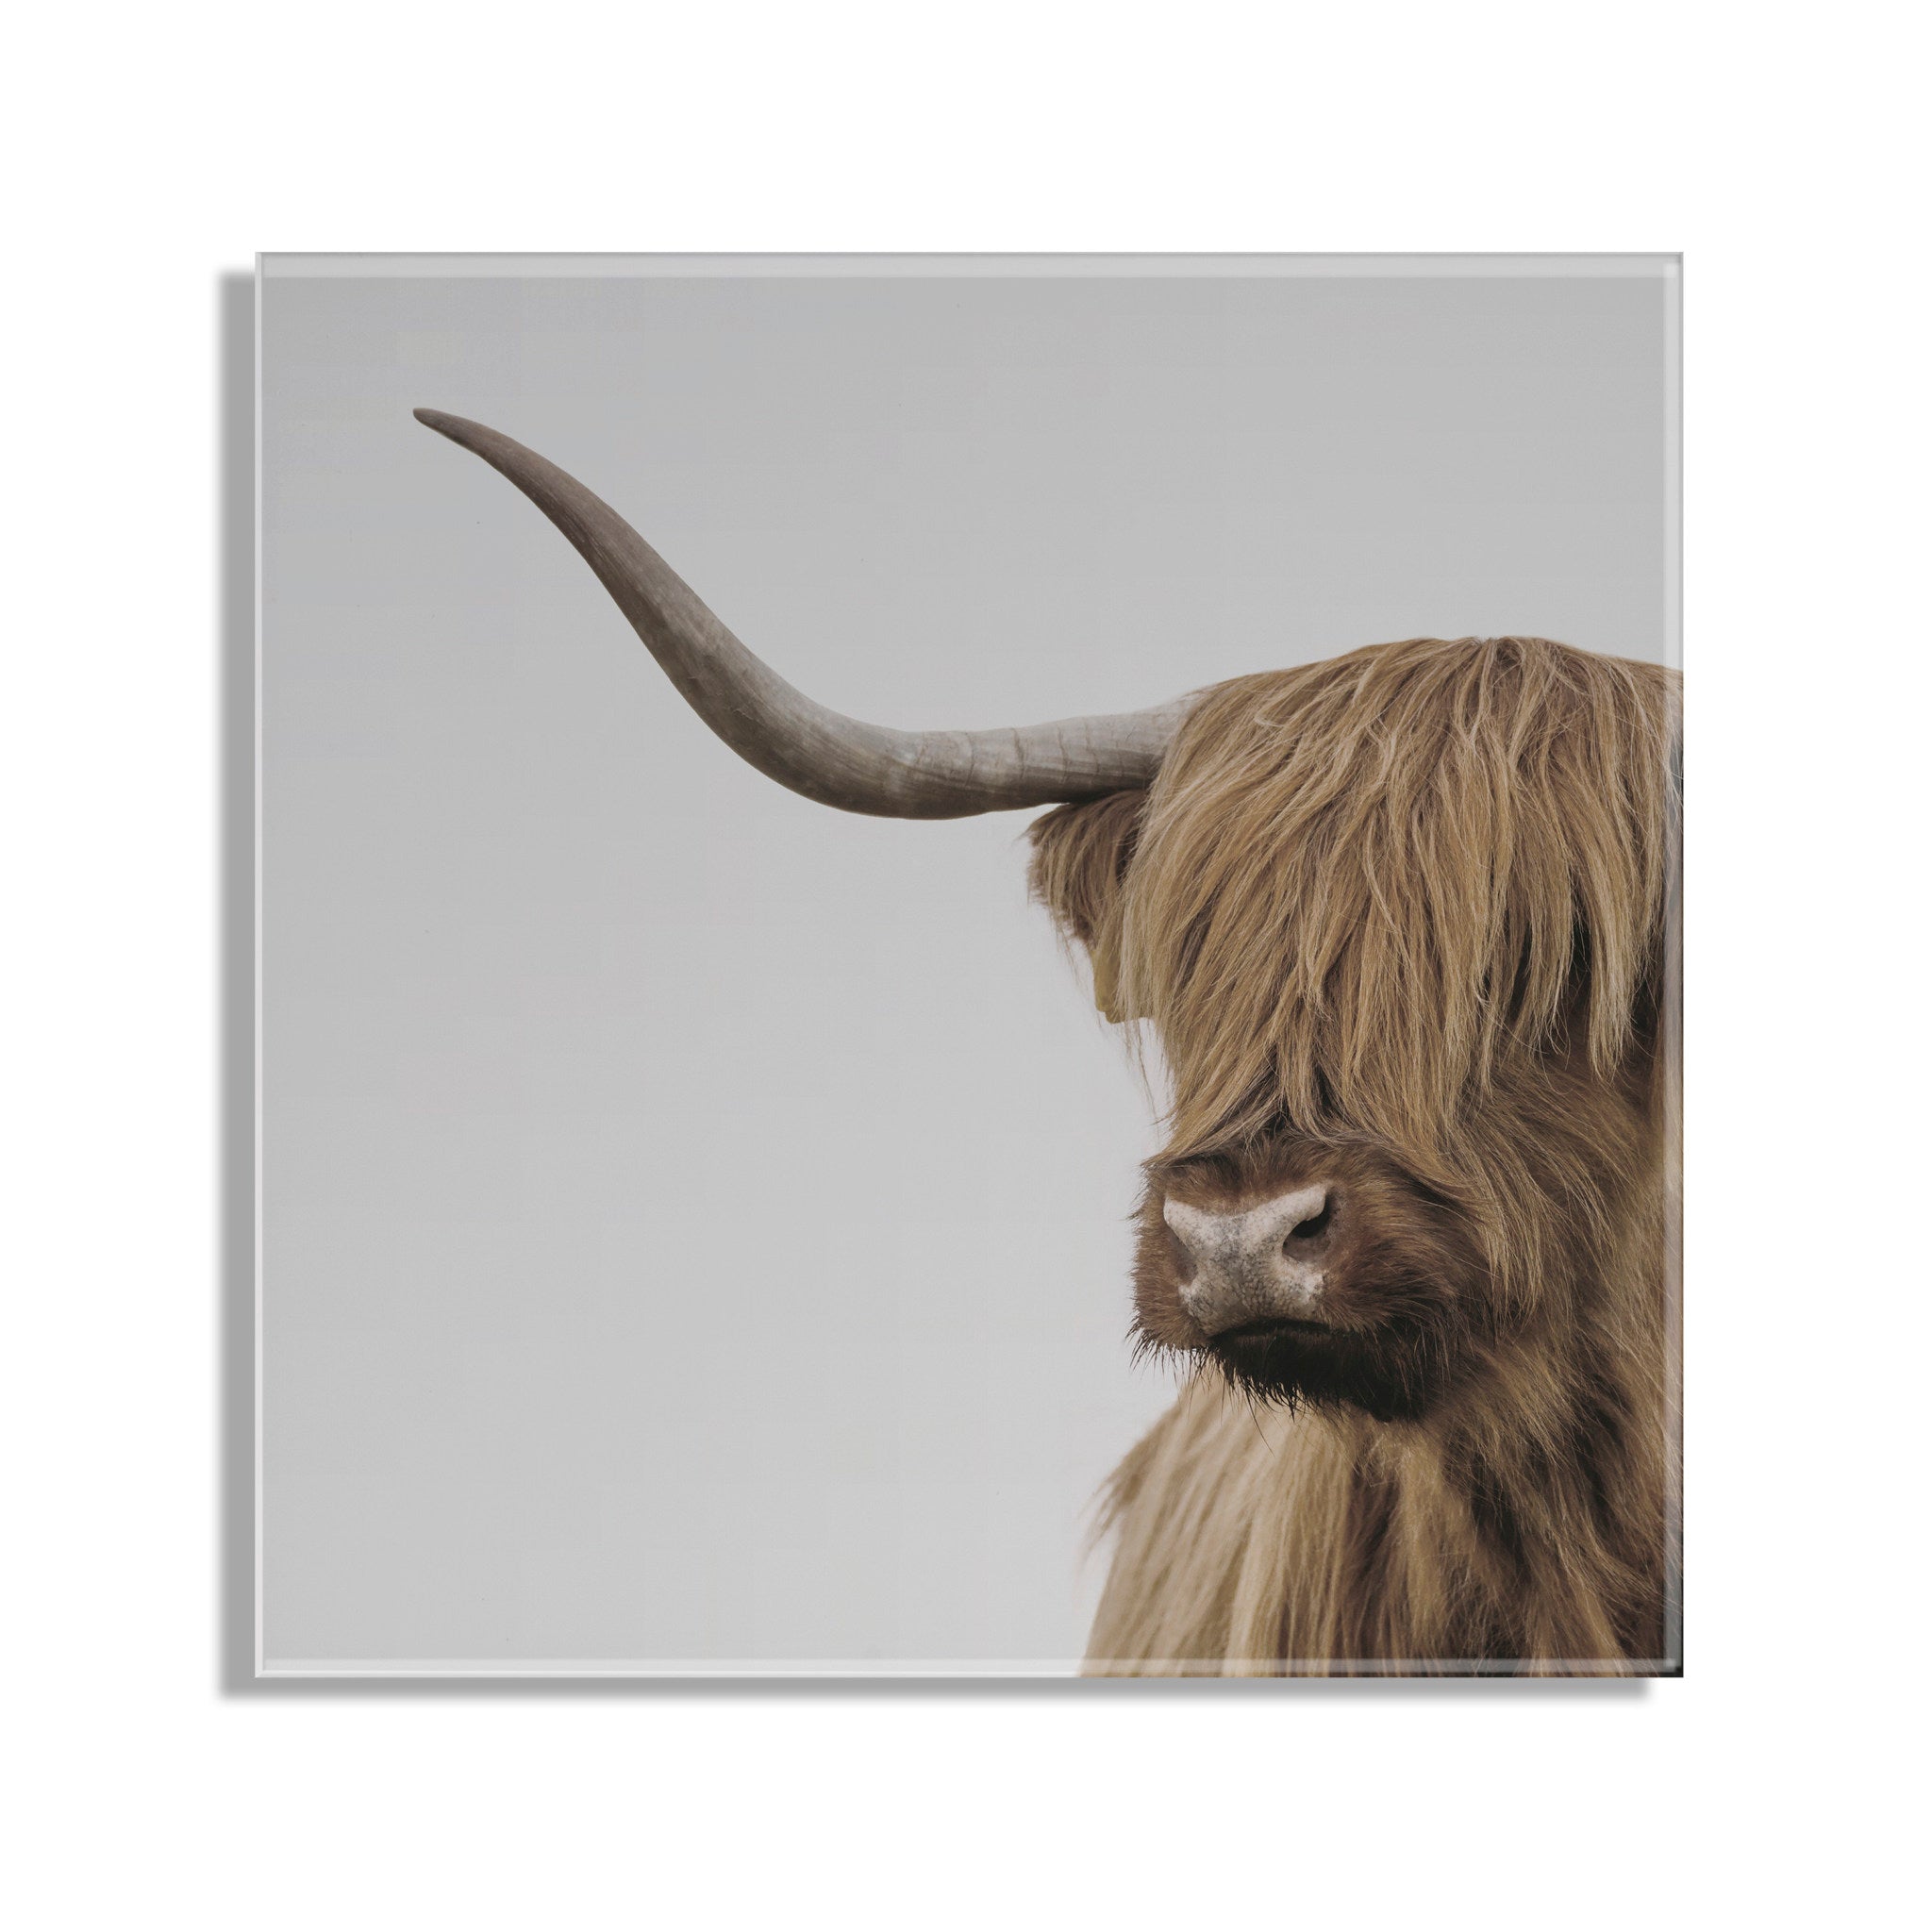 Highland Cow Portrait Close Crop Floating Acrylic Art by The Creative Bunch Studio